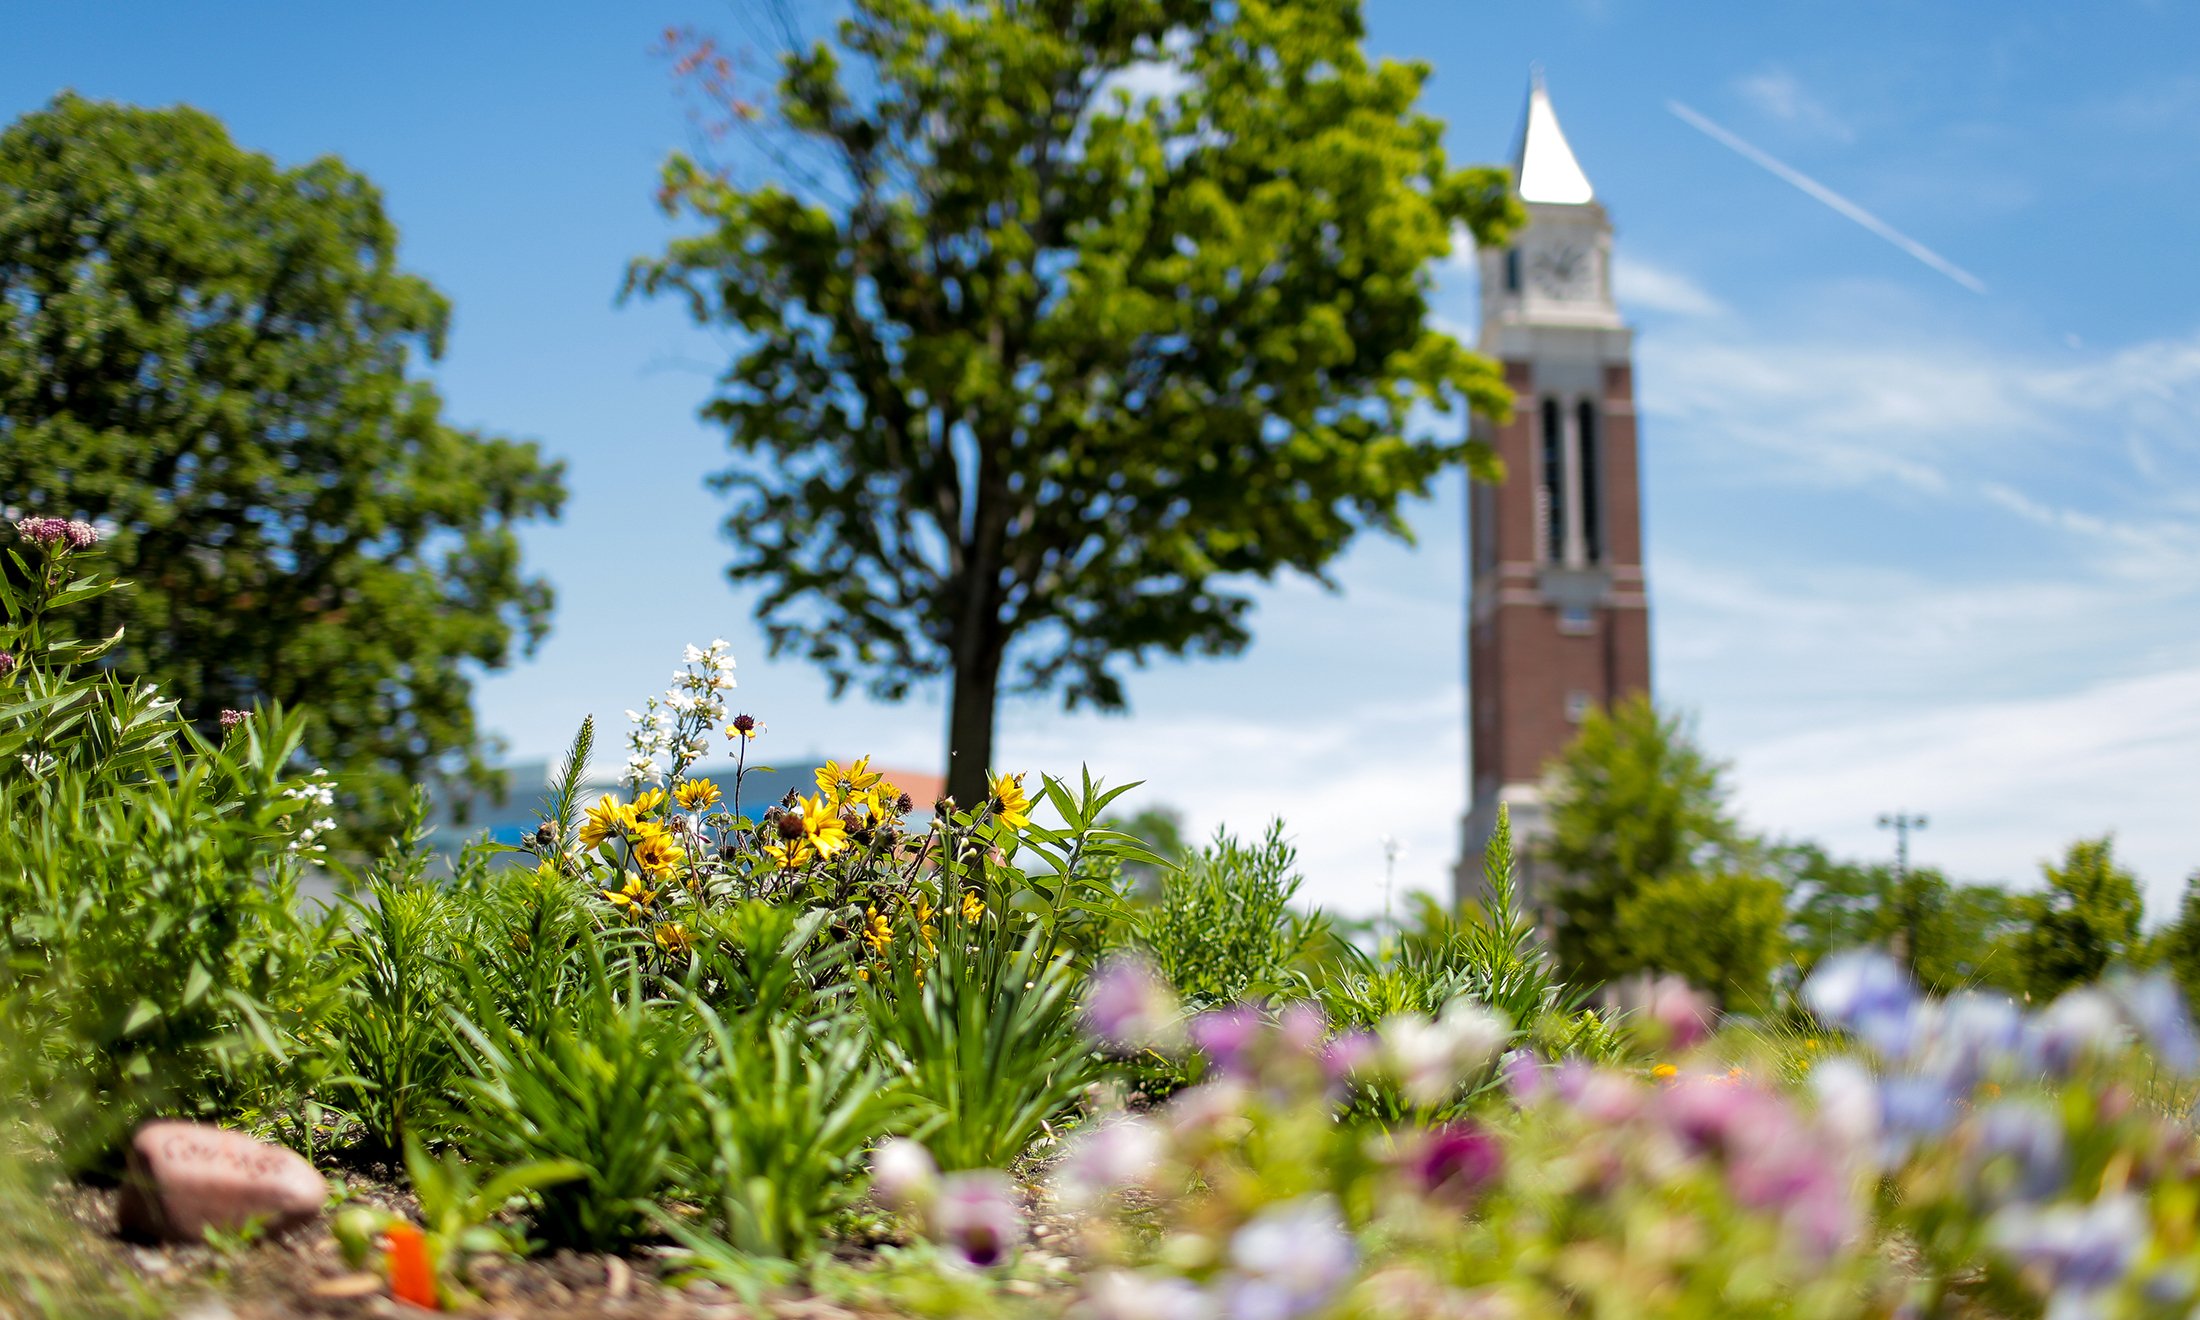 Flowers and trees with Elliott Tower in the background